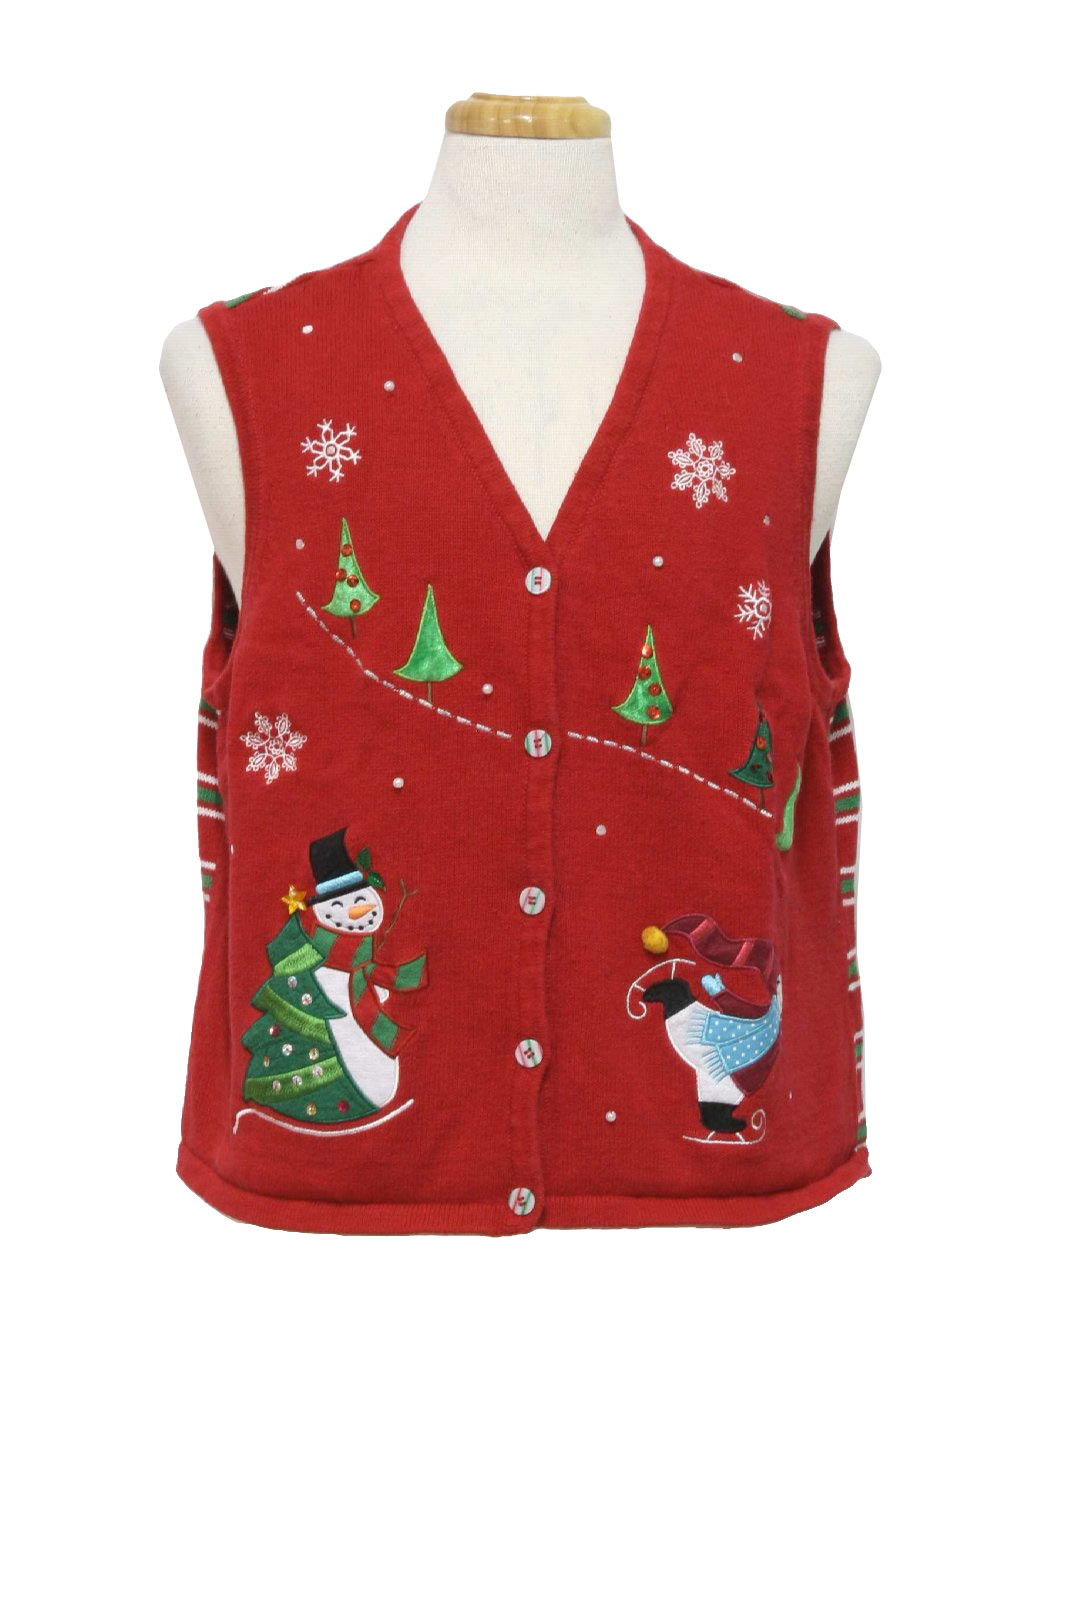 Womens Ugly Christmas Sweater Vest : -Westbound- Womens Red background ...